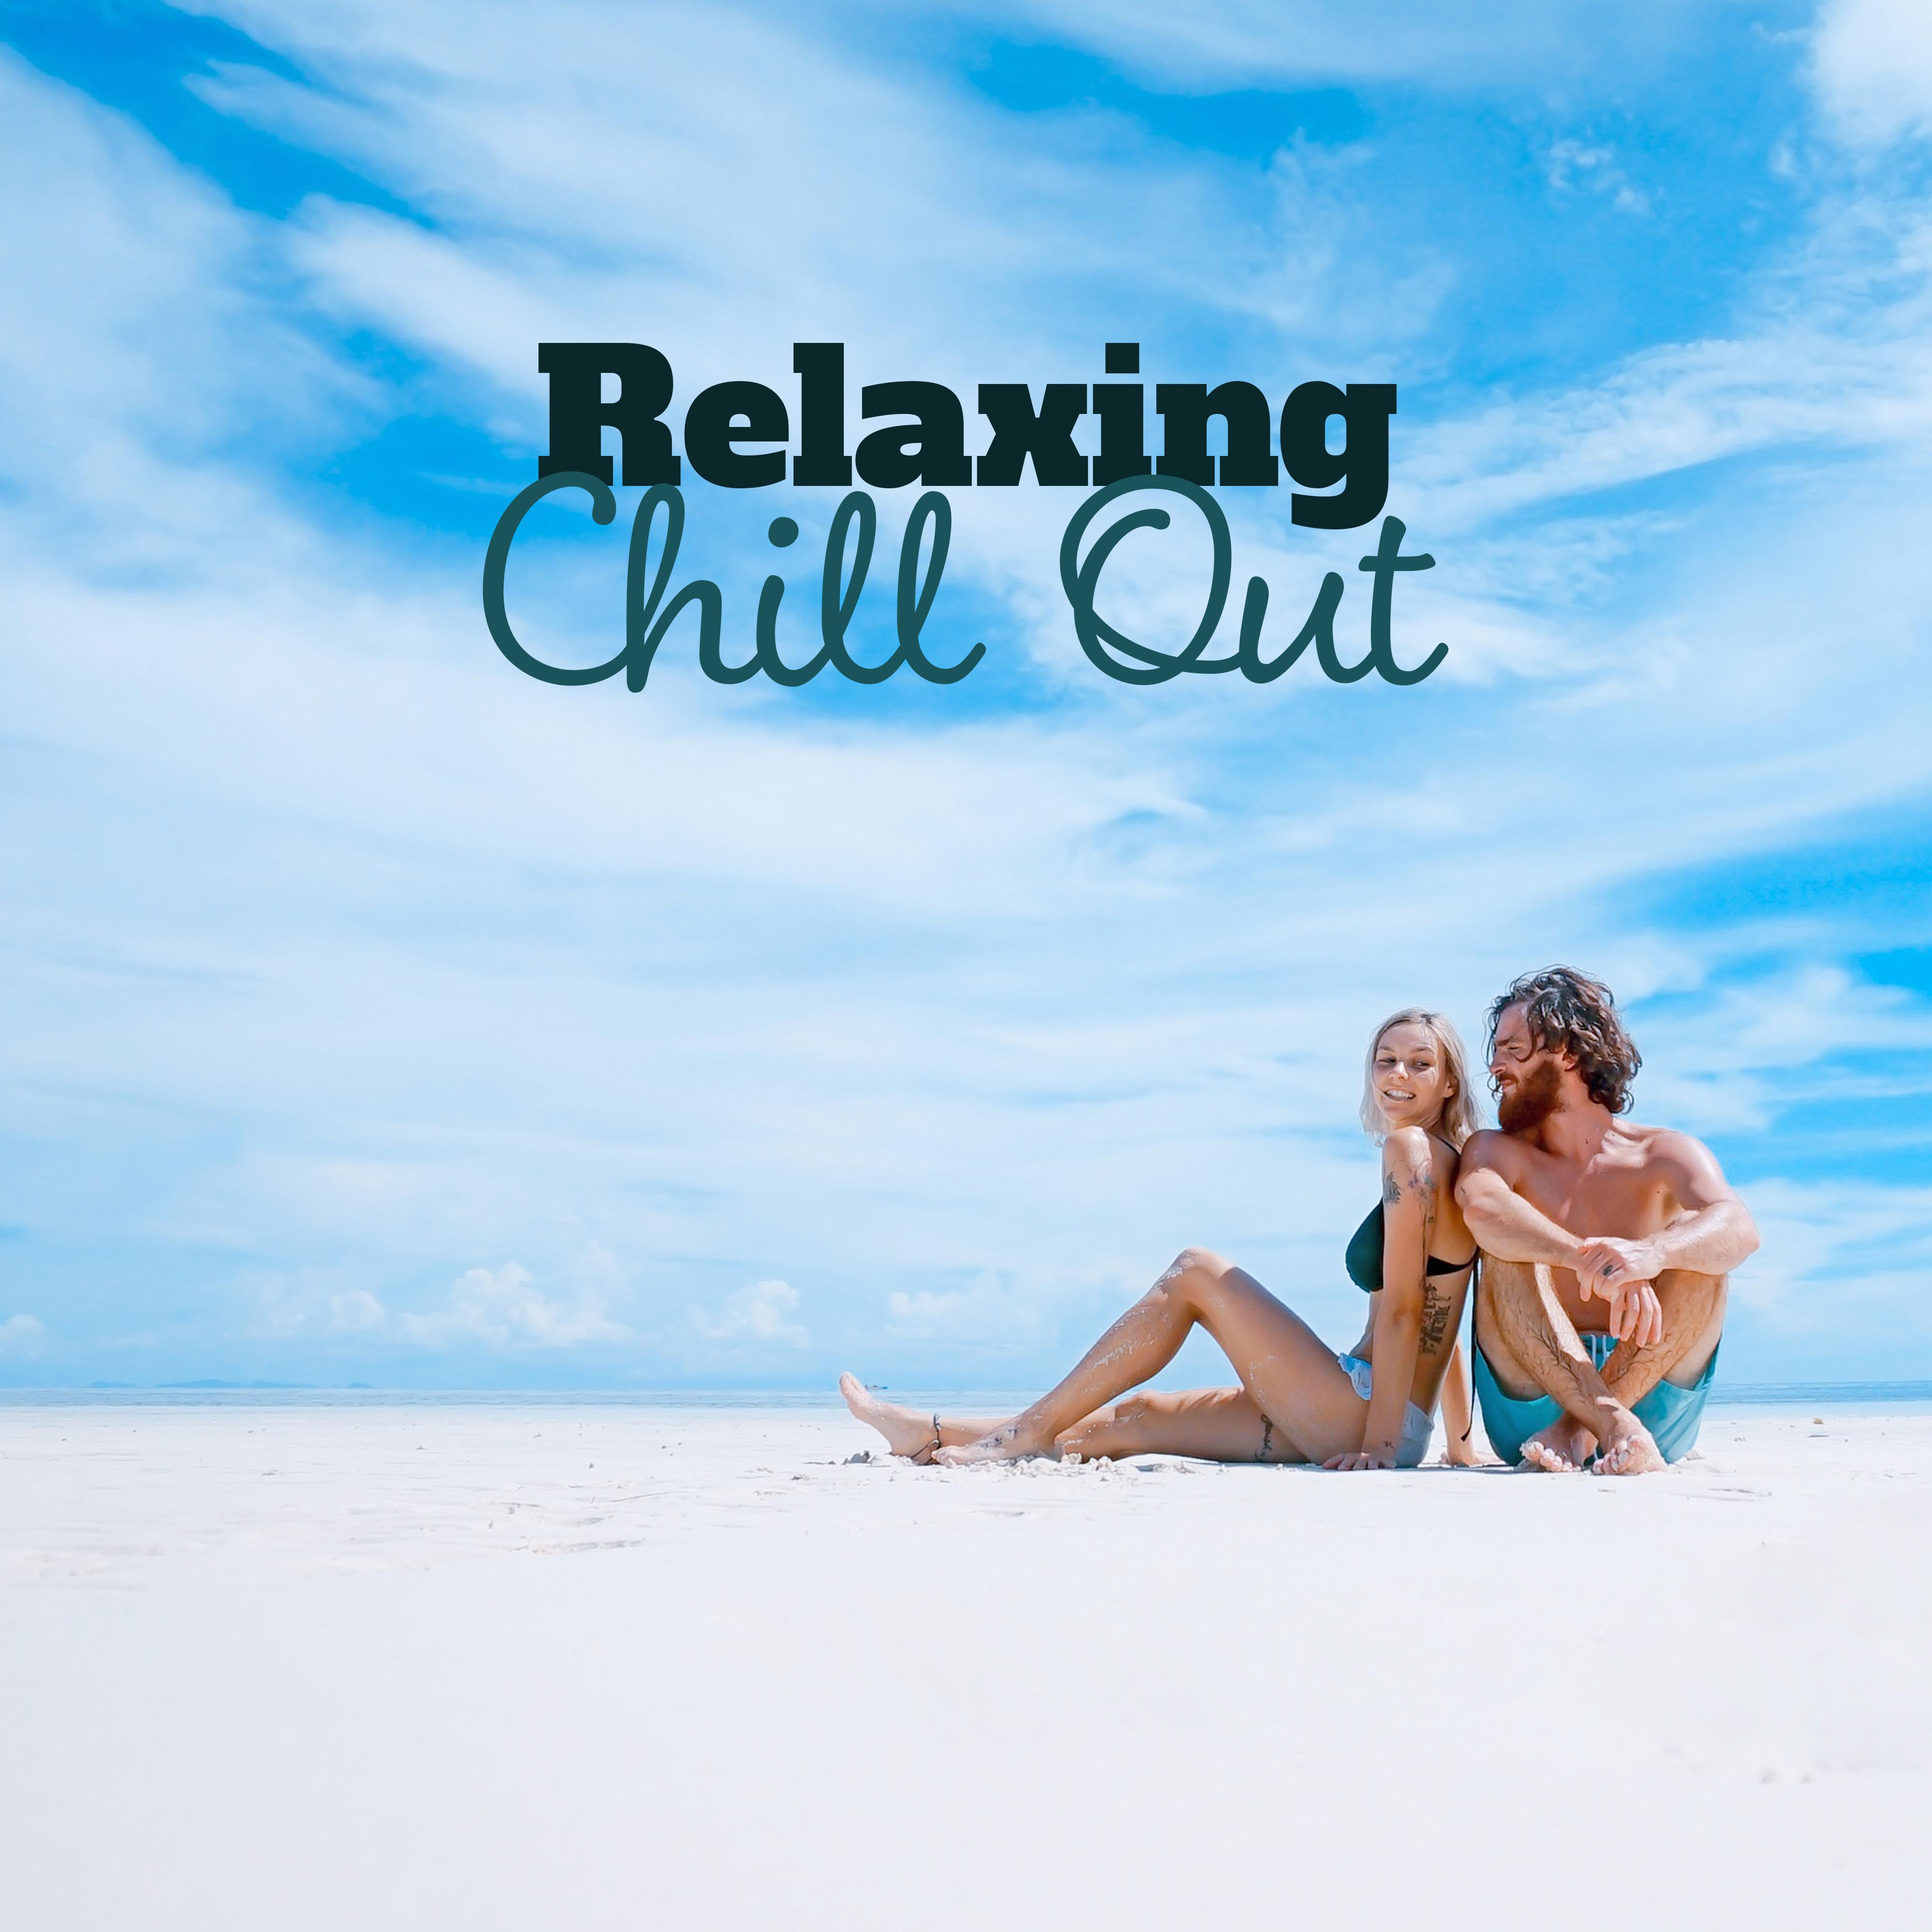 Relaxing Chill Out – Soft Vibes, Peaceful Waves, Beach Chill, Relaxation, Lounge Summer, Bar Chill Out